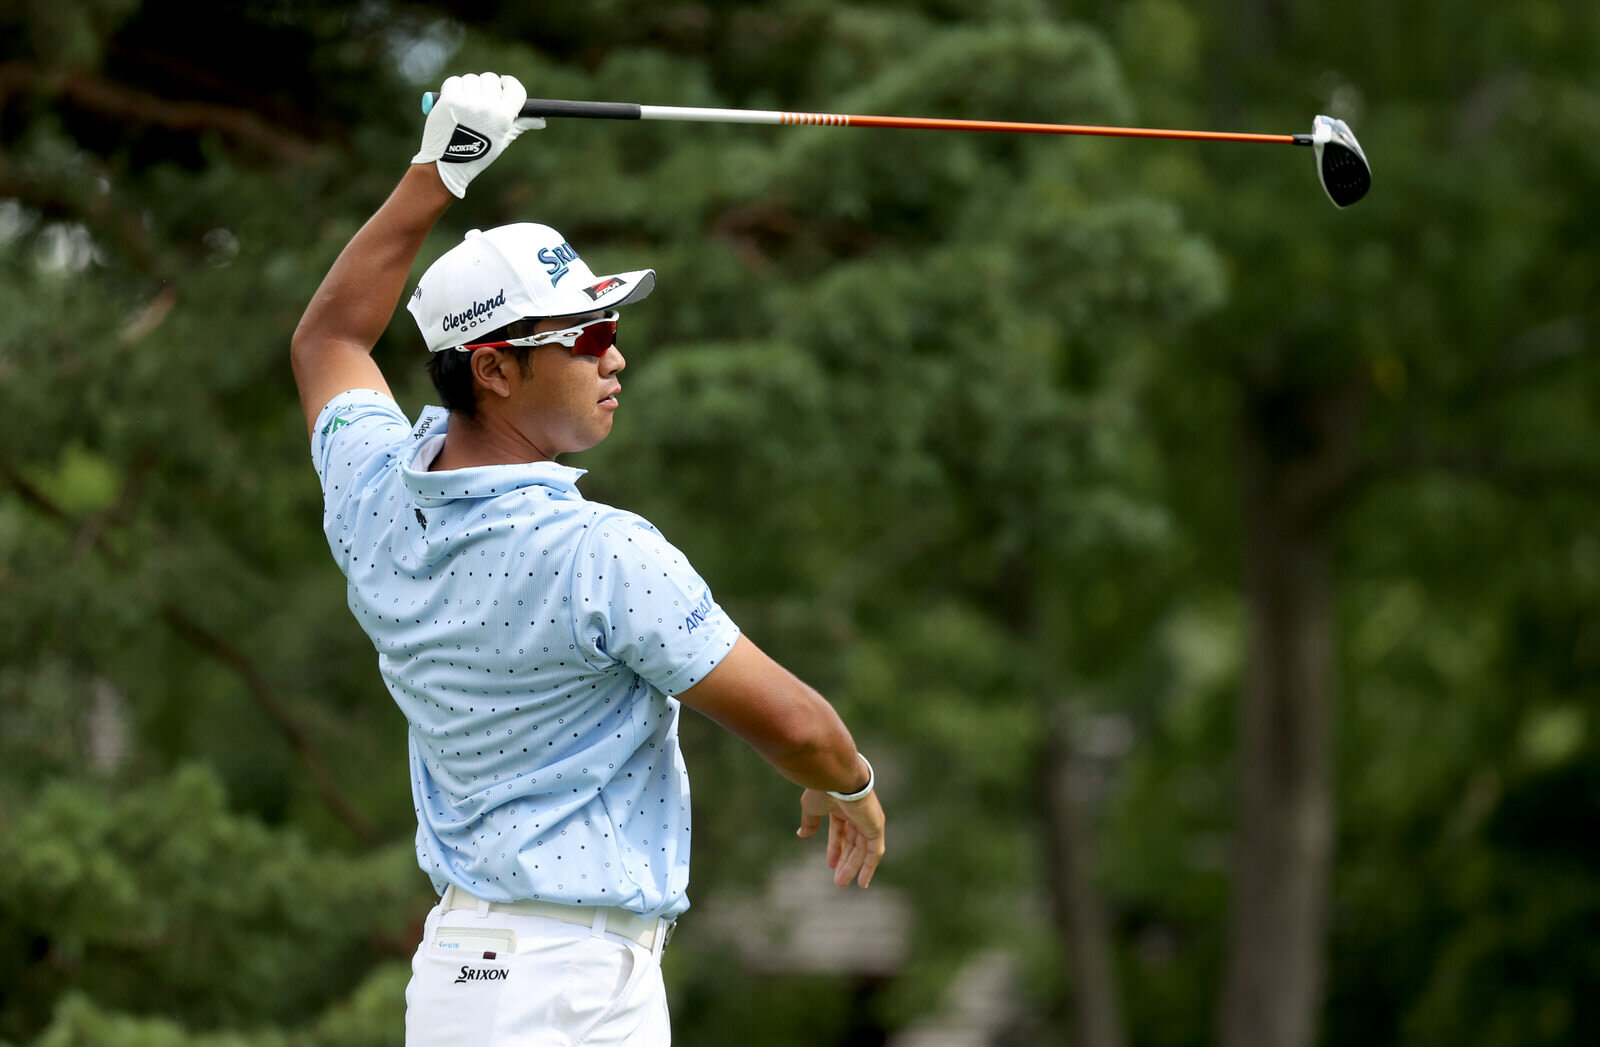  DUBLIN, OHIO - JULY 11: Hideki Matsuyama of Japan plays his shot from the 15th tee during the third round of the Workday Charity Open on July 11, 2020 at Muirfield Village Golf Club in Dublin, Ohio. (Photo by Gregory Shamus/Getty Images) 